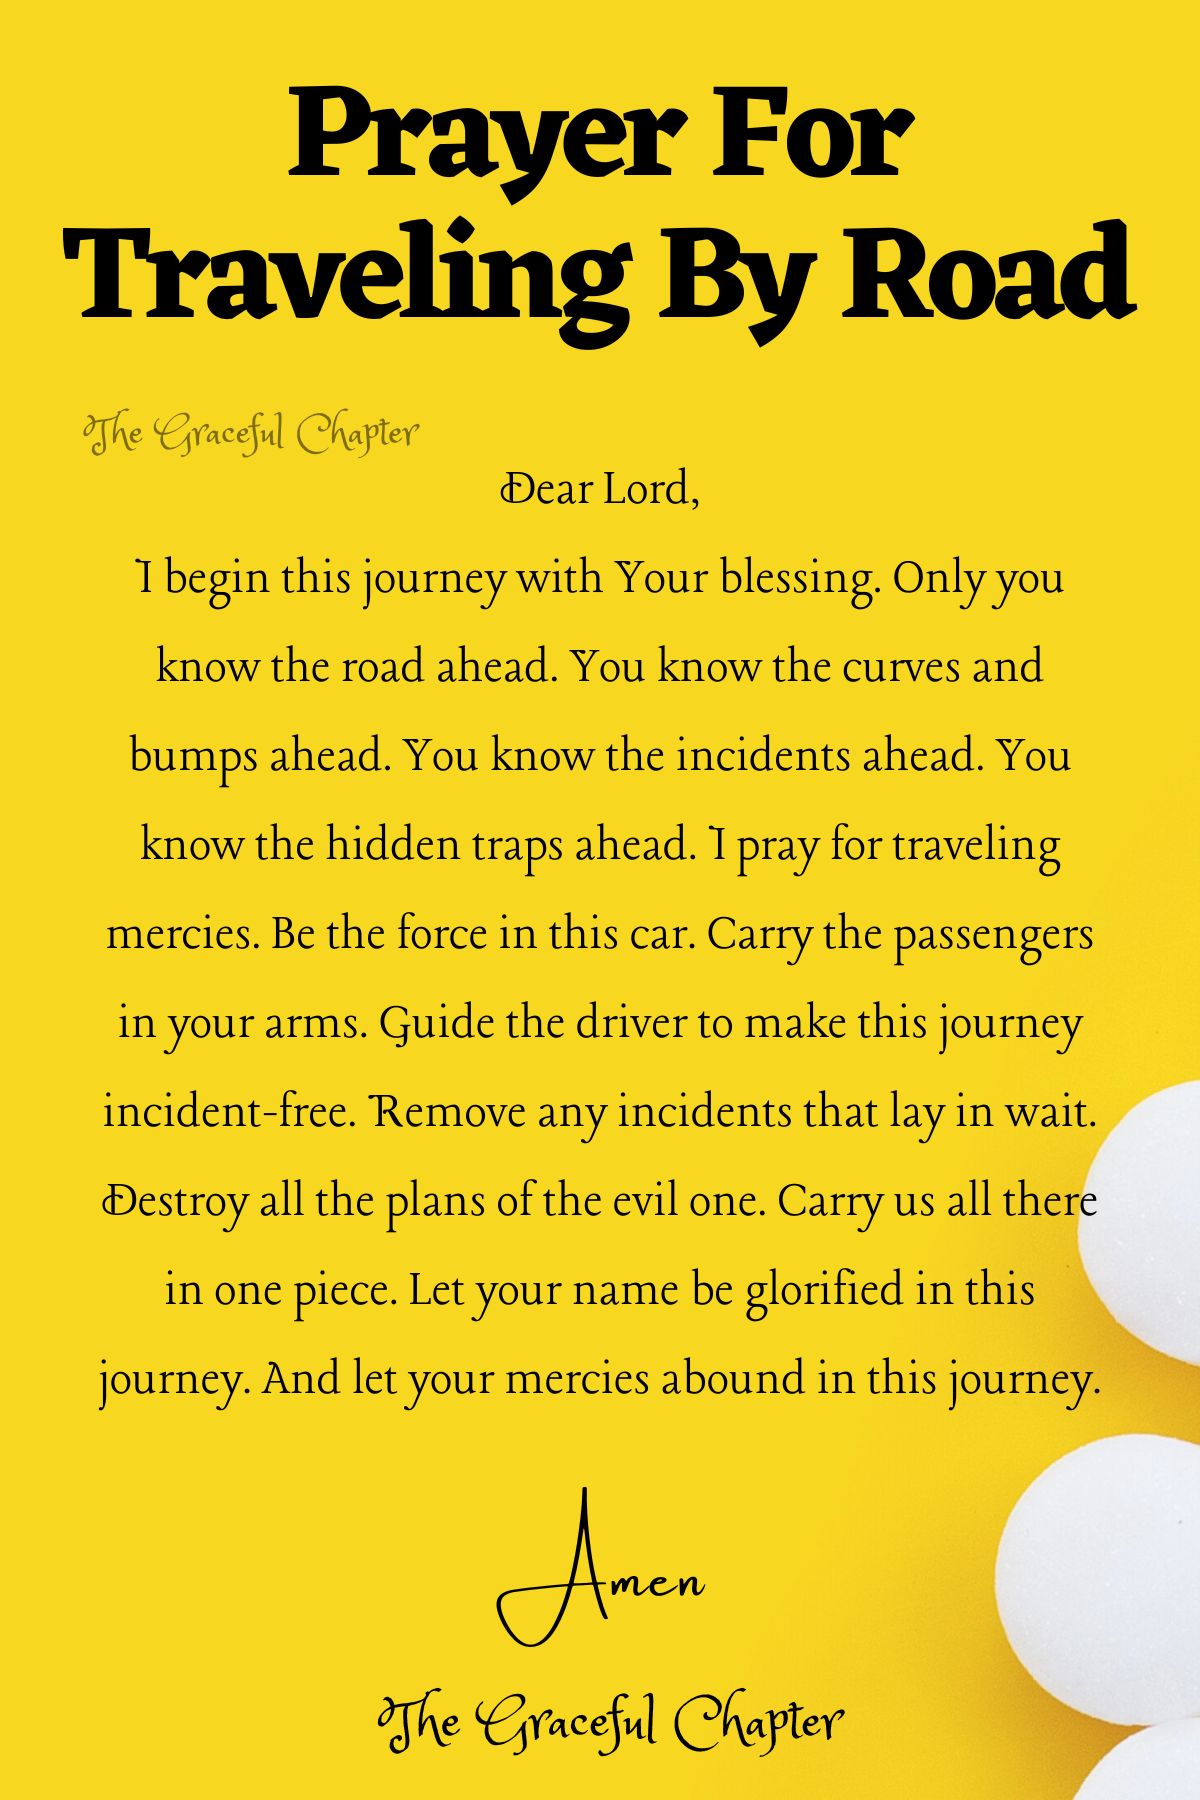 Prayer for traveling by road